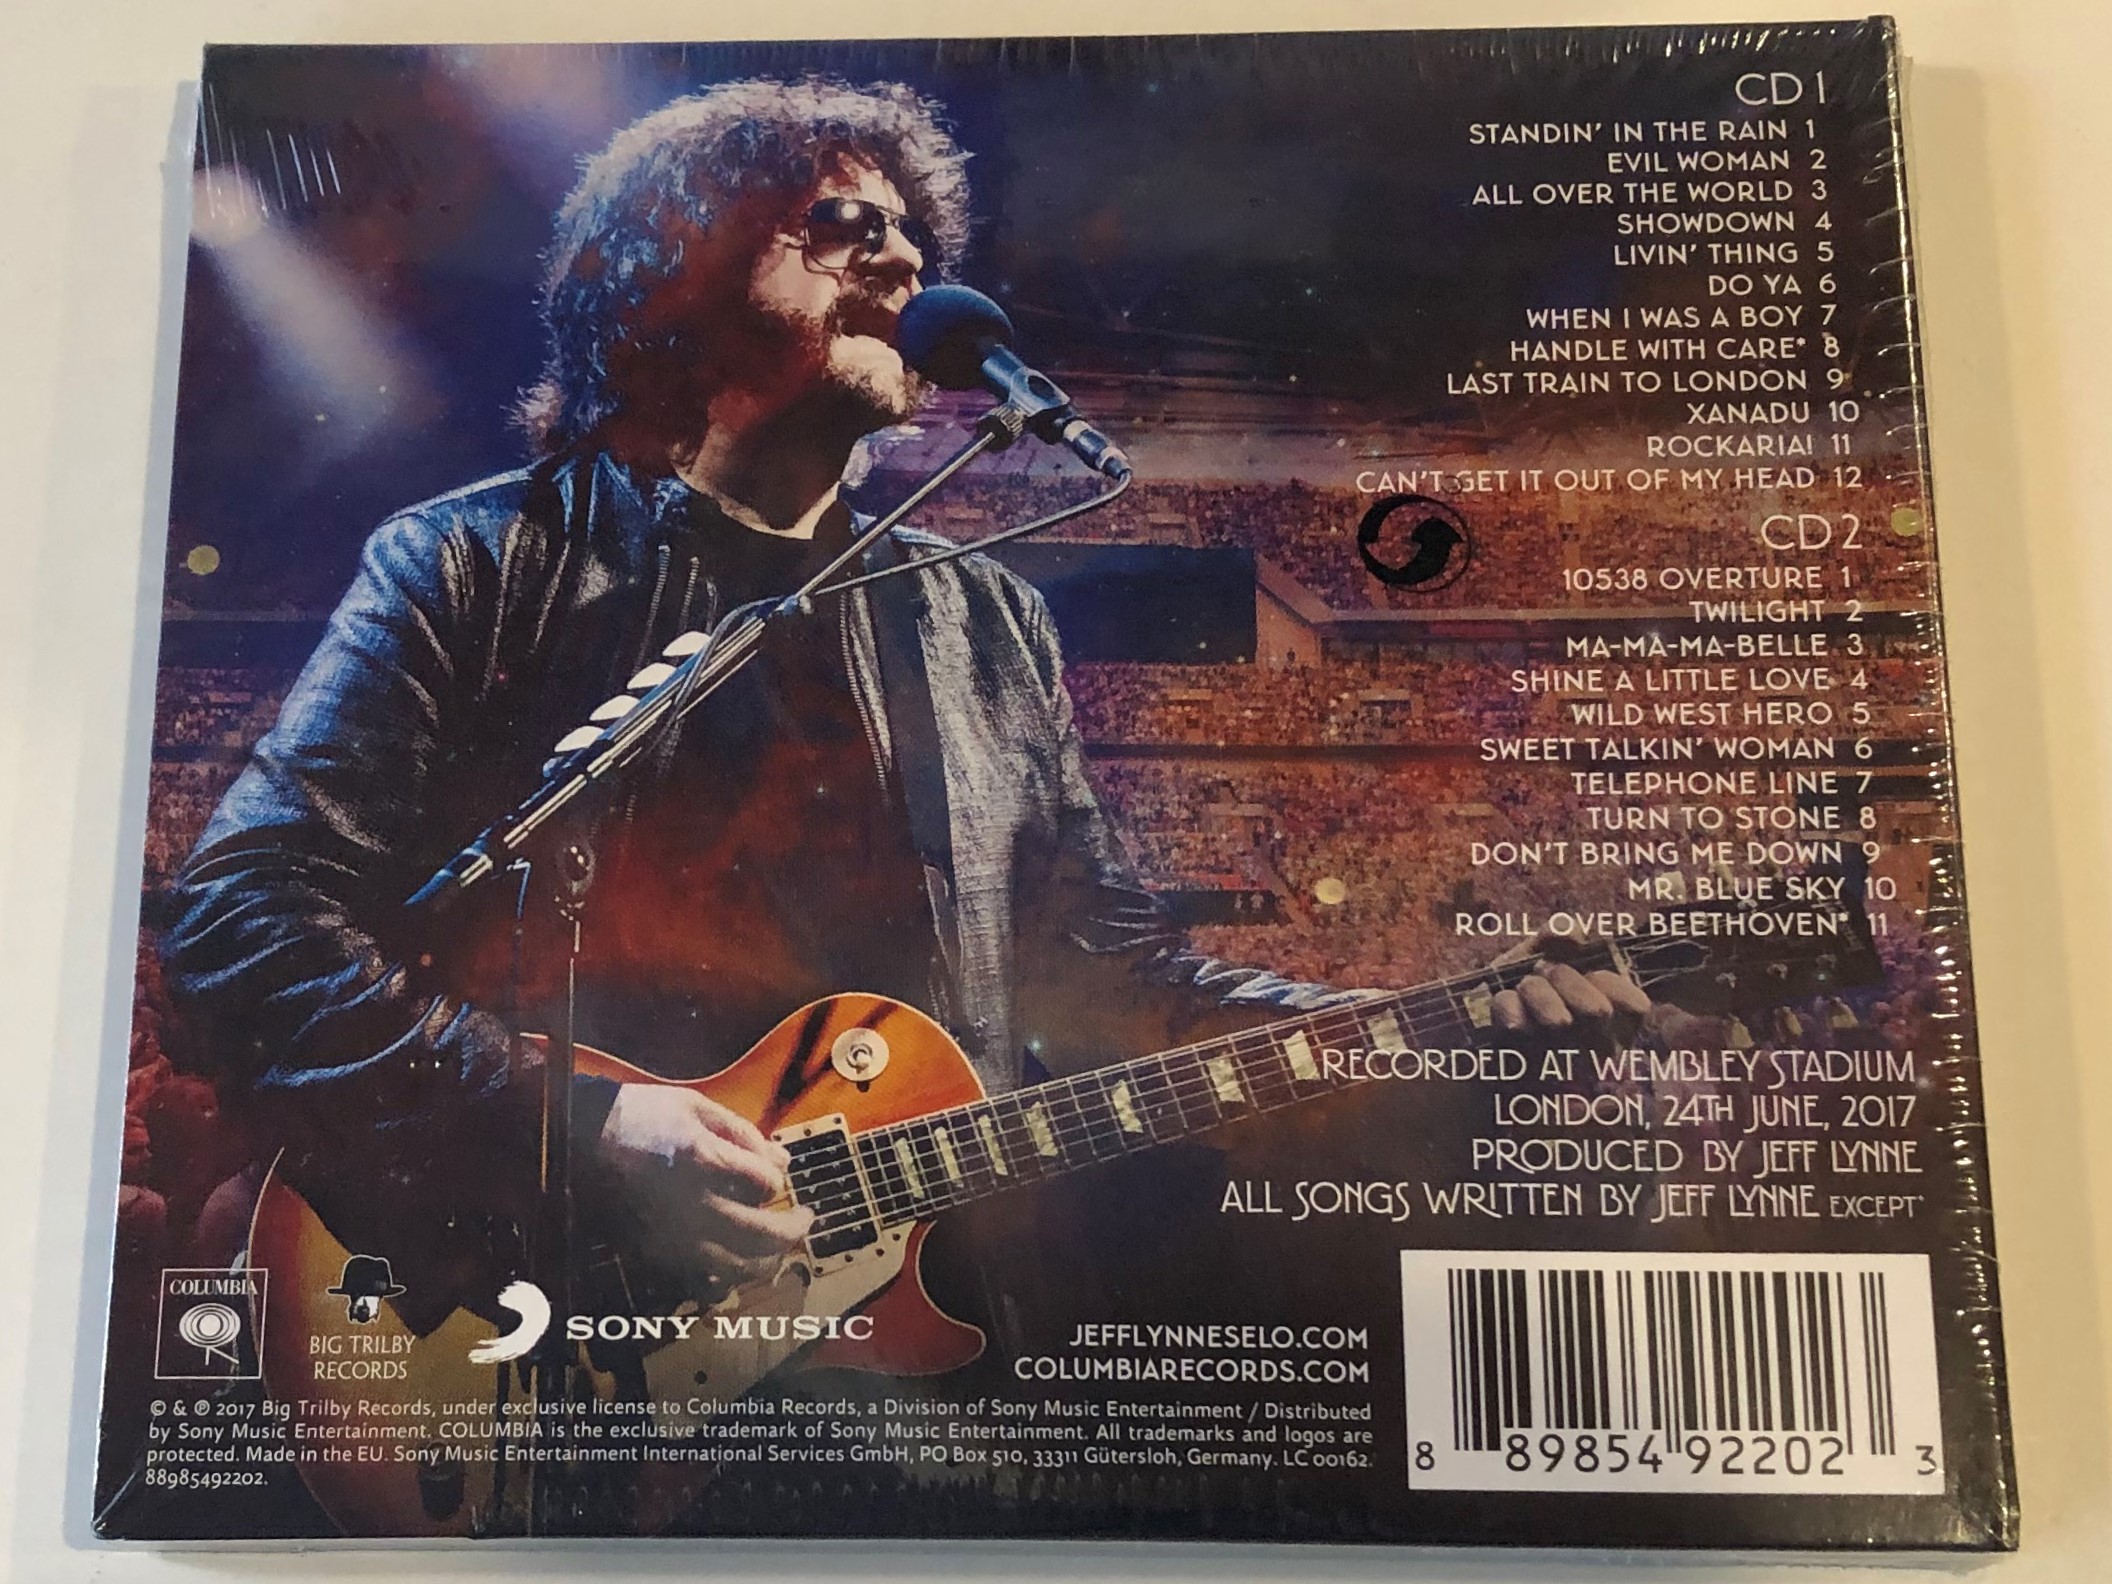 jeff-lynne-s-elo-wembley-or-bust-live-at-wembley-stadium-recorded-on-june-24th-2017-featuring-evil-woman-mr.-blue-sky-turn-to-stone-big-trilby-records-2x-audio-cd-2017-88.jpg